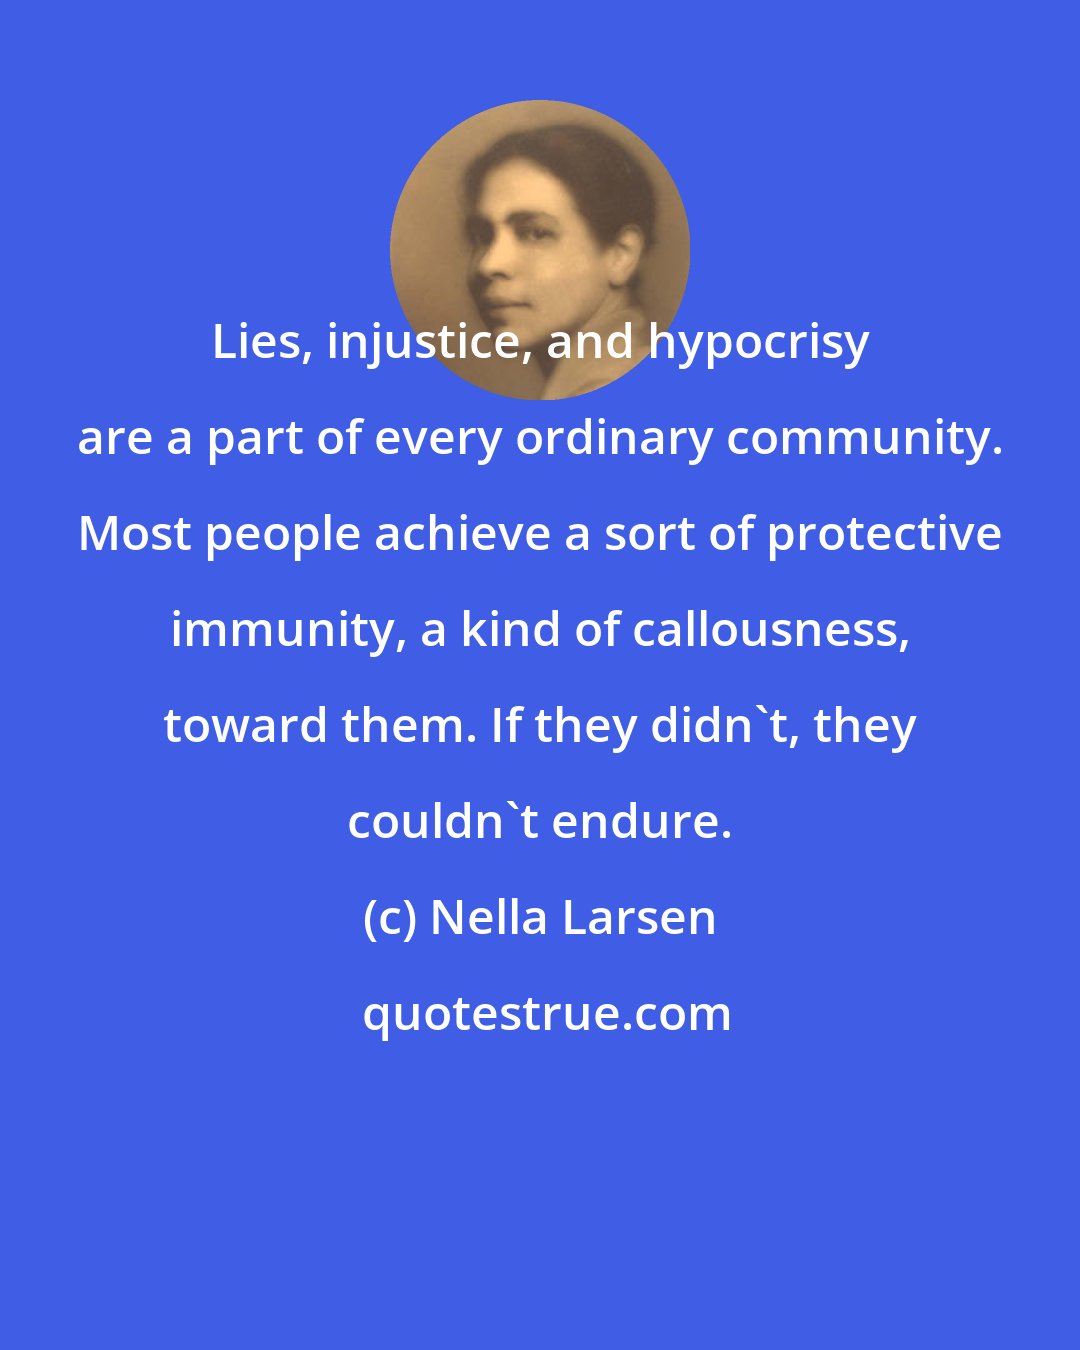 Nella Larsen: Lies, injustice, and hypocrisy are a part of every ordinary community. Most people achieve a sort of protective immunity, a kind of callousness, toward them. If they didn't, they couldn't endure.